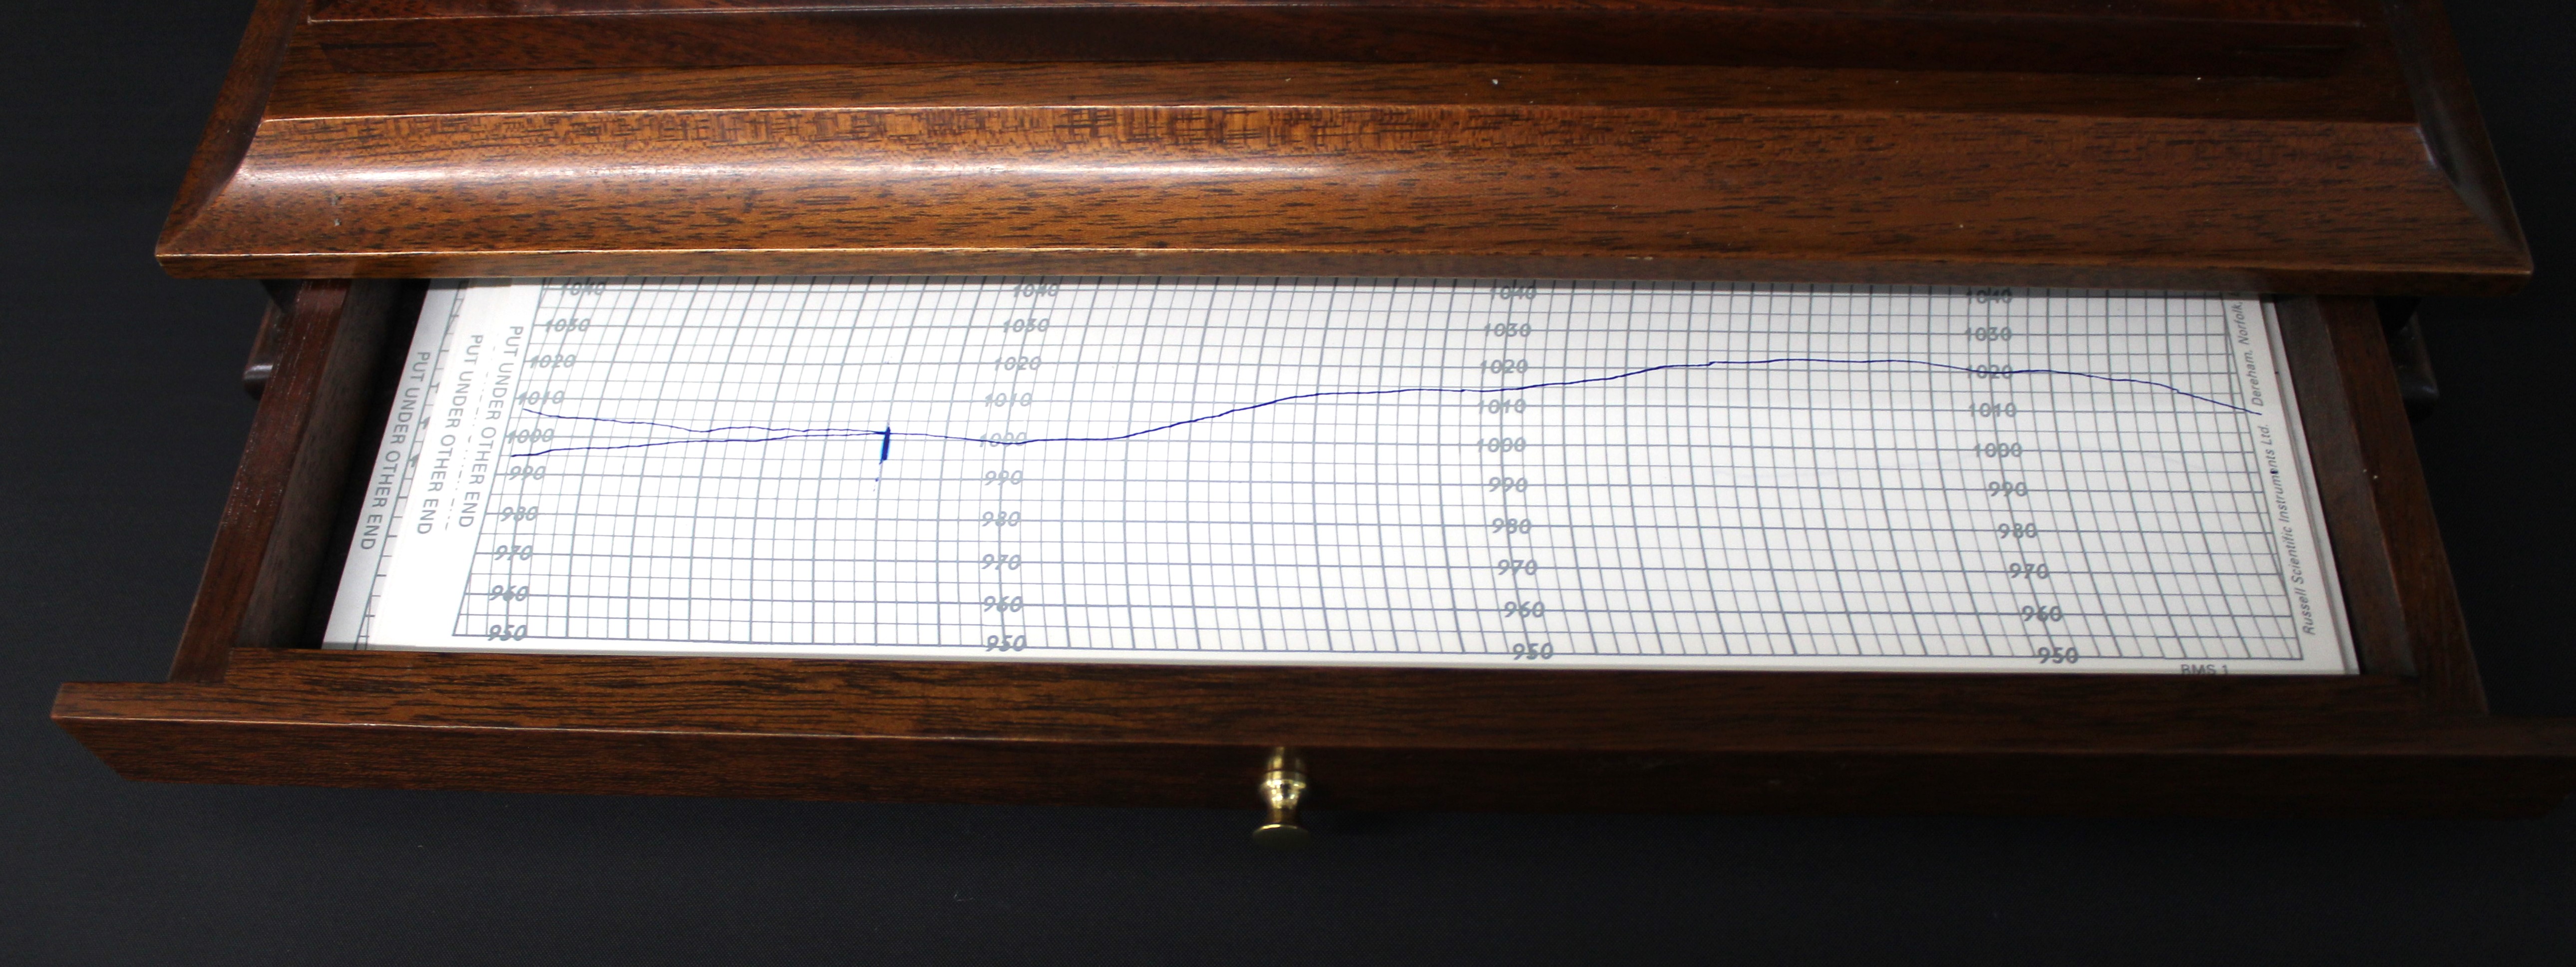 Russell Norwich barograph in mahogany case, with bevelled glass & lower drawer (missing nib) - Image 3 of 4